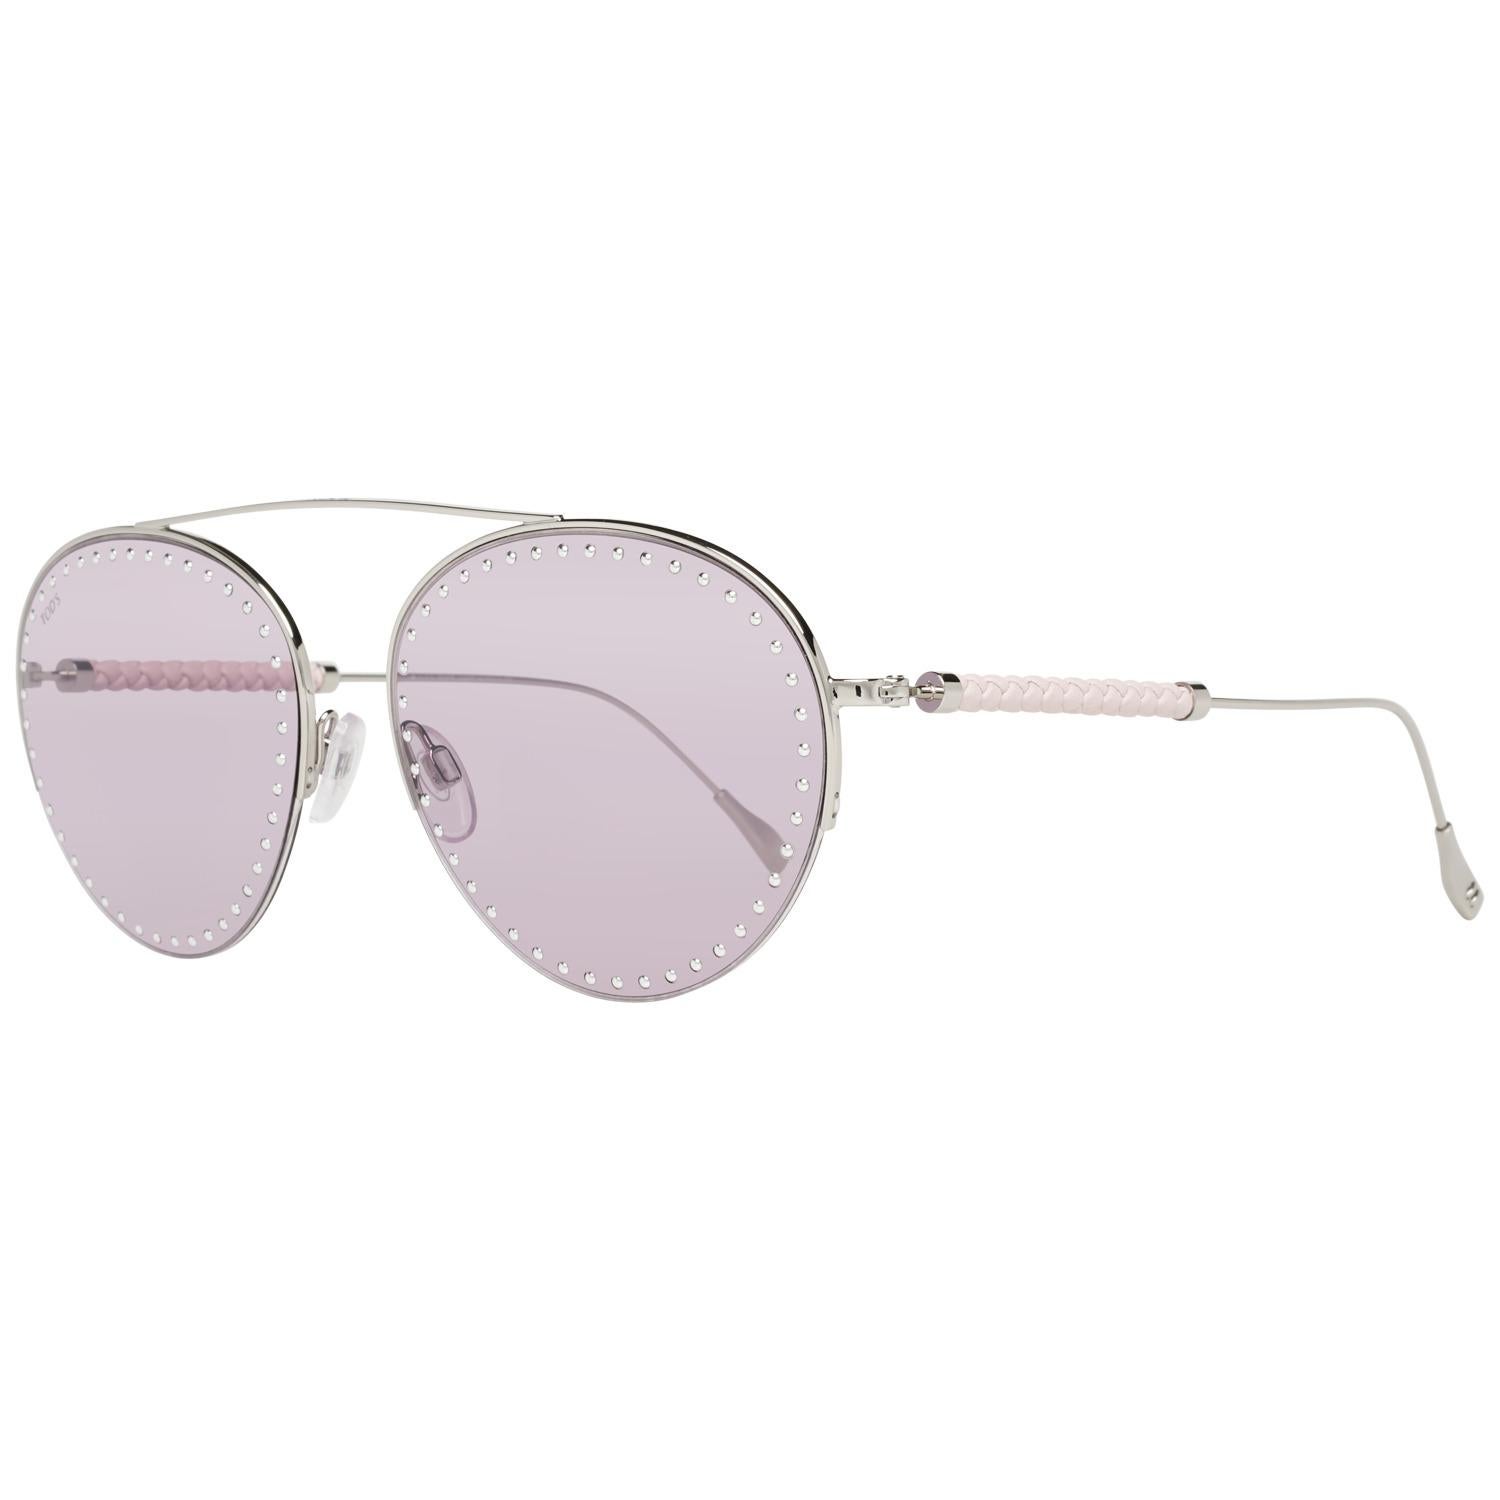 Details

MATERIAL: Metal

COLOR: Silver

MODEL: TO0234 6016Y

GENDER: Women

COUNTRY OF MANUFACTURE: Italy

TYPE: Sunglasses

ORIGINAL CASE?: Yes

STYLE: Aviator

OCCASION: Casual

FEATURES: Lightweight

LENS COLOR: Pink

LENS TECHNOLOGY: No